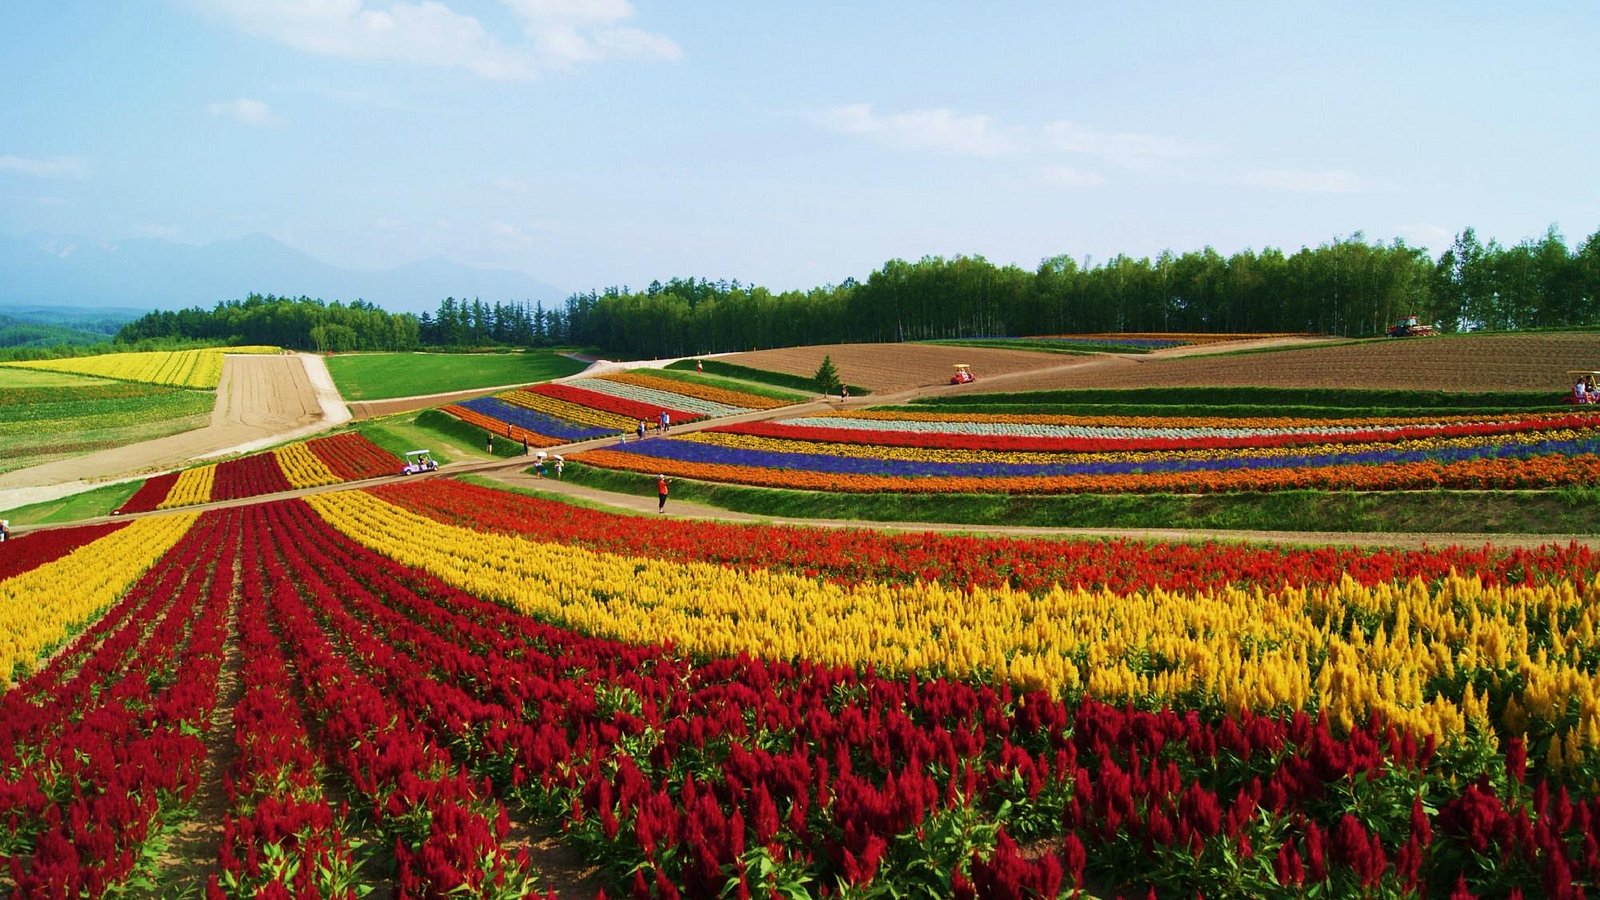 THE 10 BEST Hotels in Hokkaido of 2023 (with Prices) - Tripadvisor